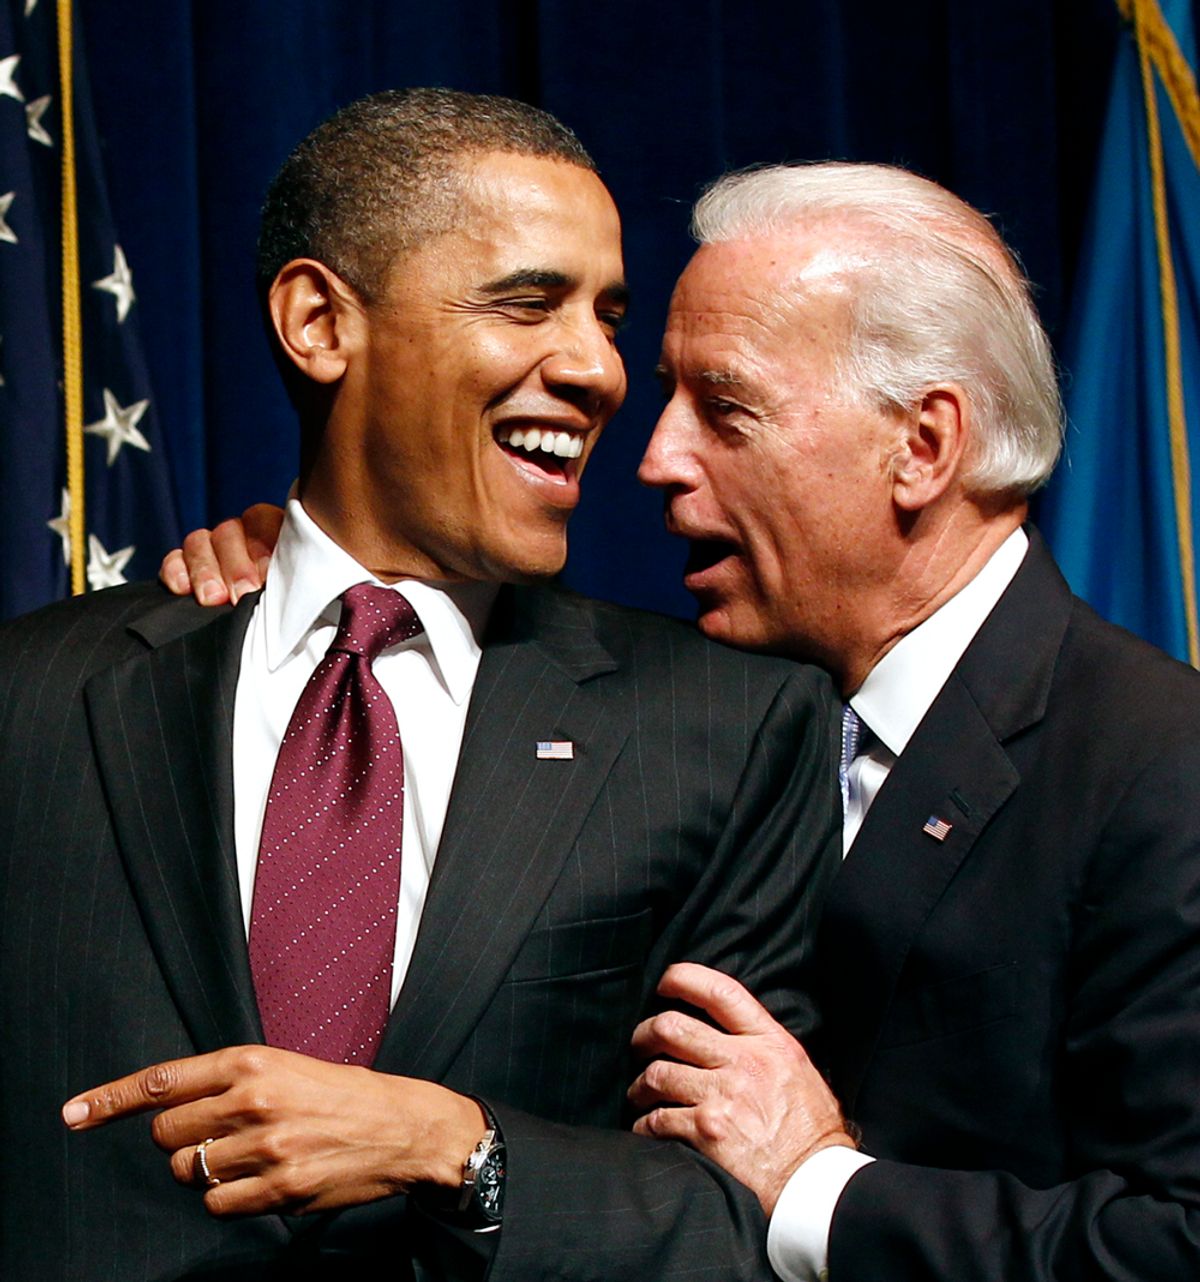 U.S. President Barack Obama laughs with Vice President Joe Biden at an event for candidate Chris Coons, the Democrat running for a Senate seat against Christine O'Donnell in Wilmington, Delaware October 15, 2010. REUTERS/Kevin Lamarque (UNITED STATES - Tags: POLITICS ELECTIONS)  (Â© Kevin Lamarque / Reuters)